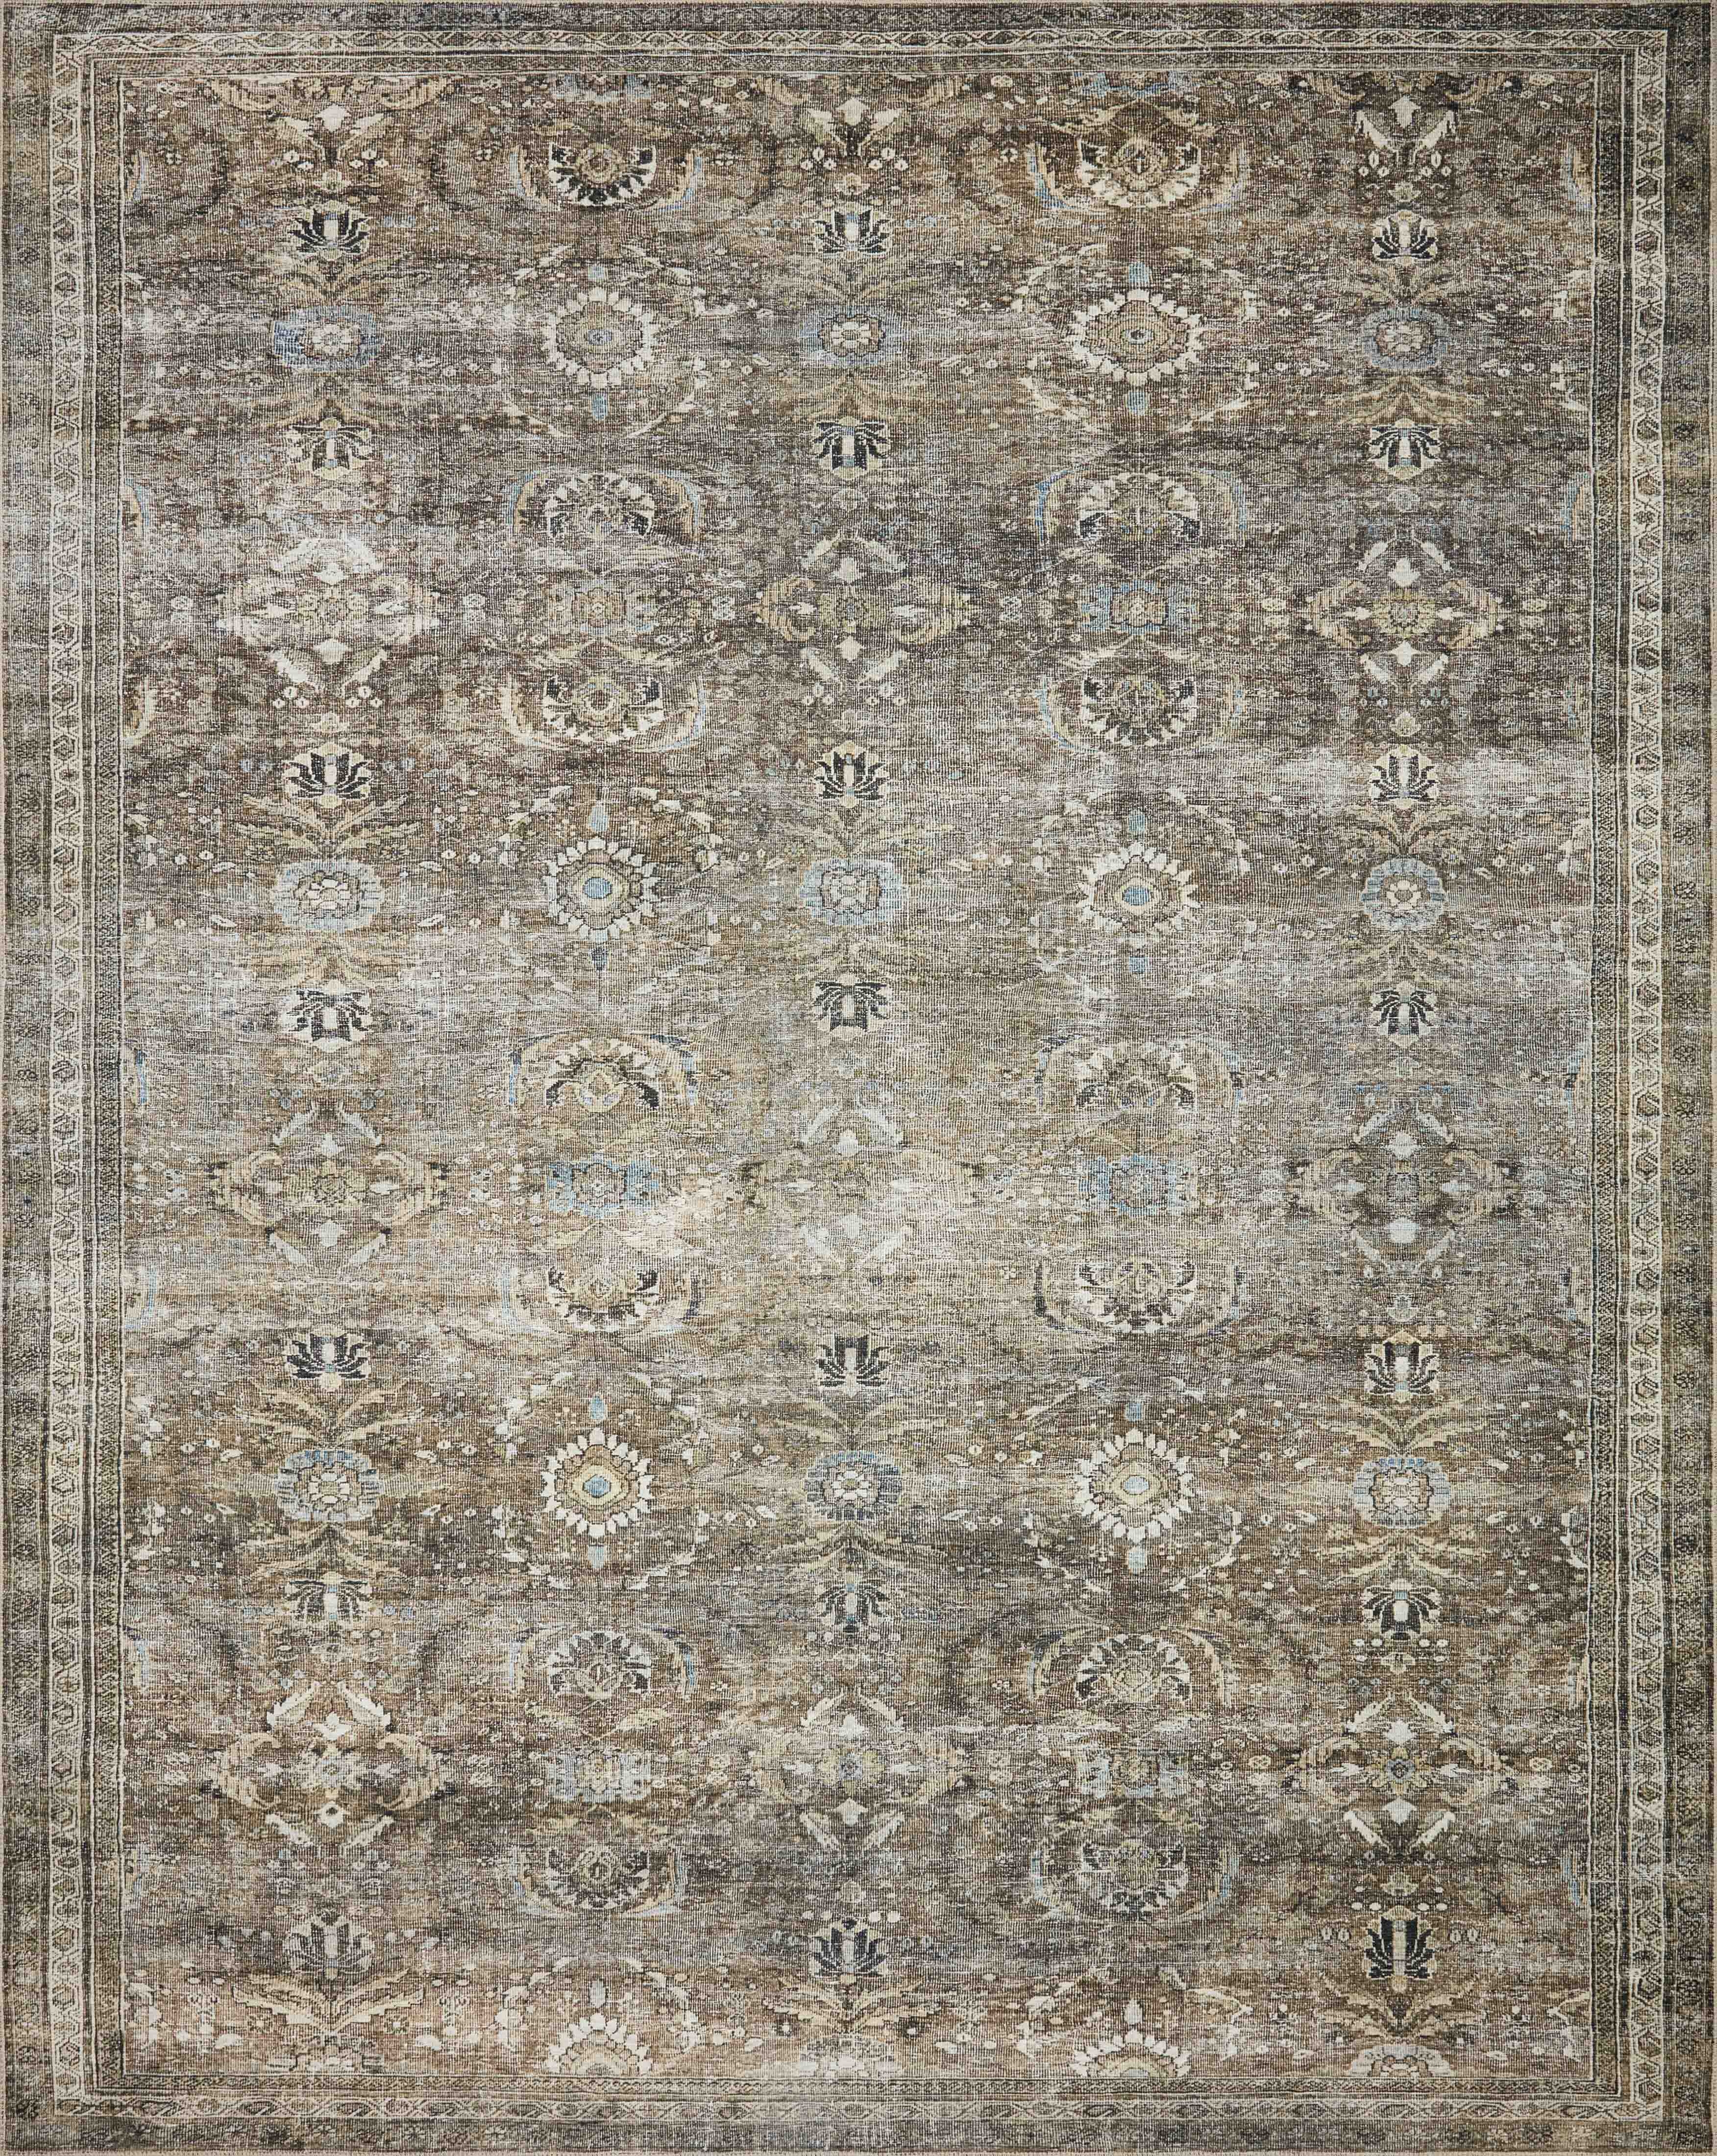 Layla Collection rug - LAY-13 Antique / Moss - Image 1